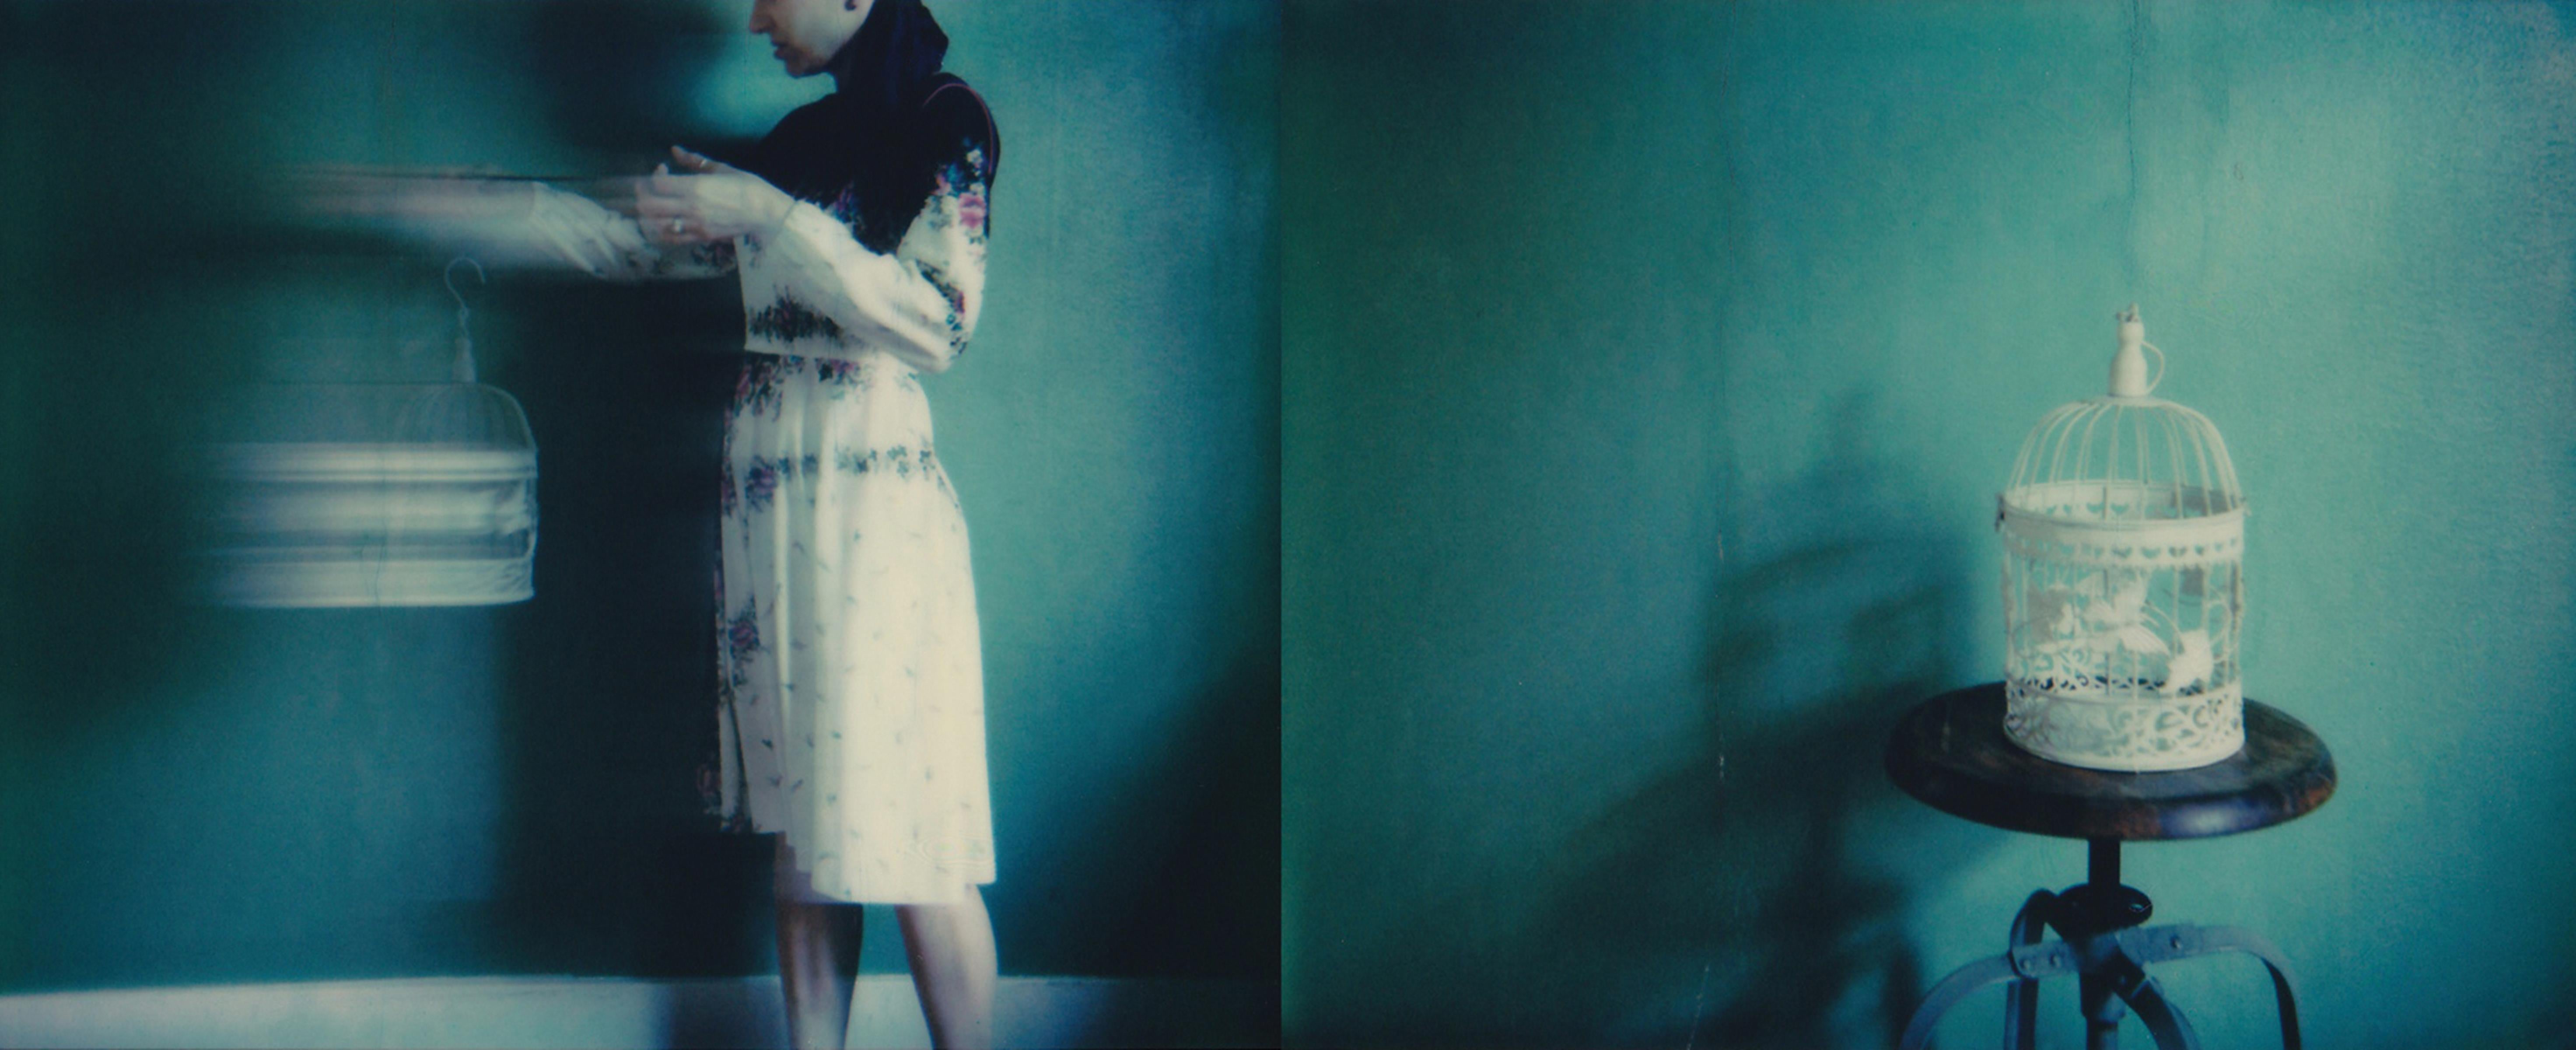 Lisa Toboz Color Photograph - Untitled - from the Dwell series - Contemporary, Figurative, Woman, Polaroid